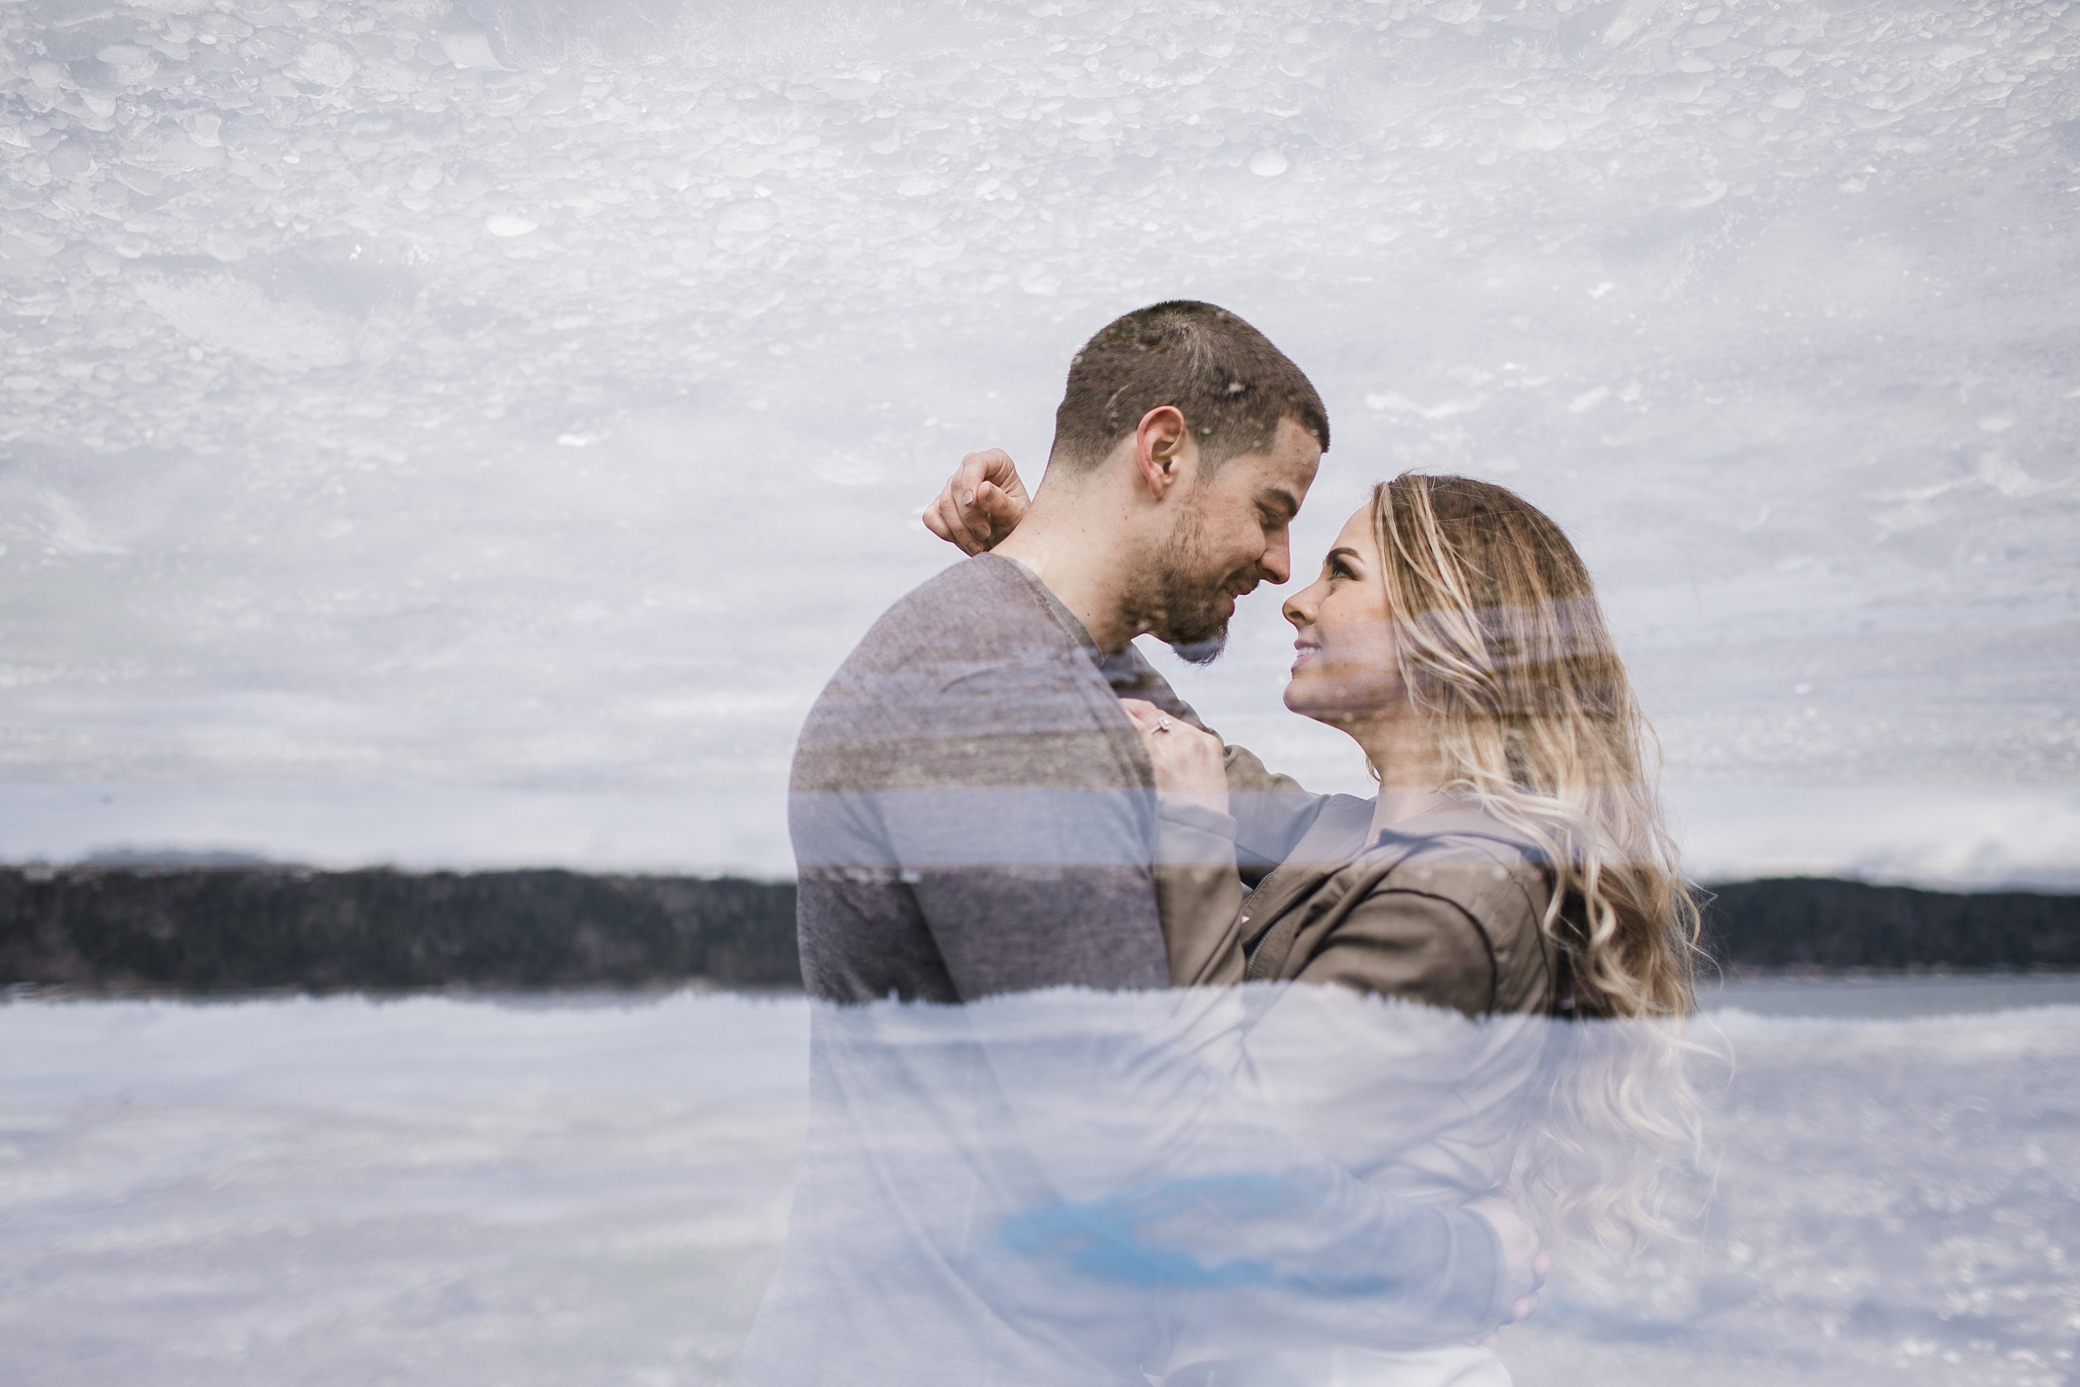 Double exposure during engagement session | Megan Montalvo Photography